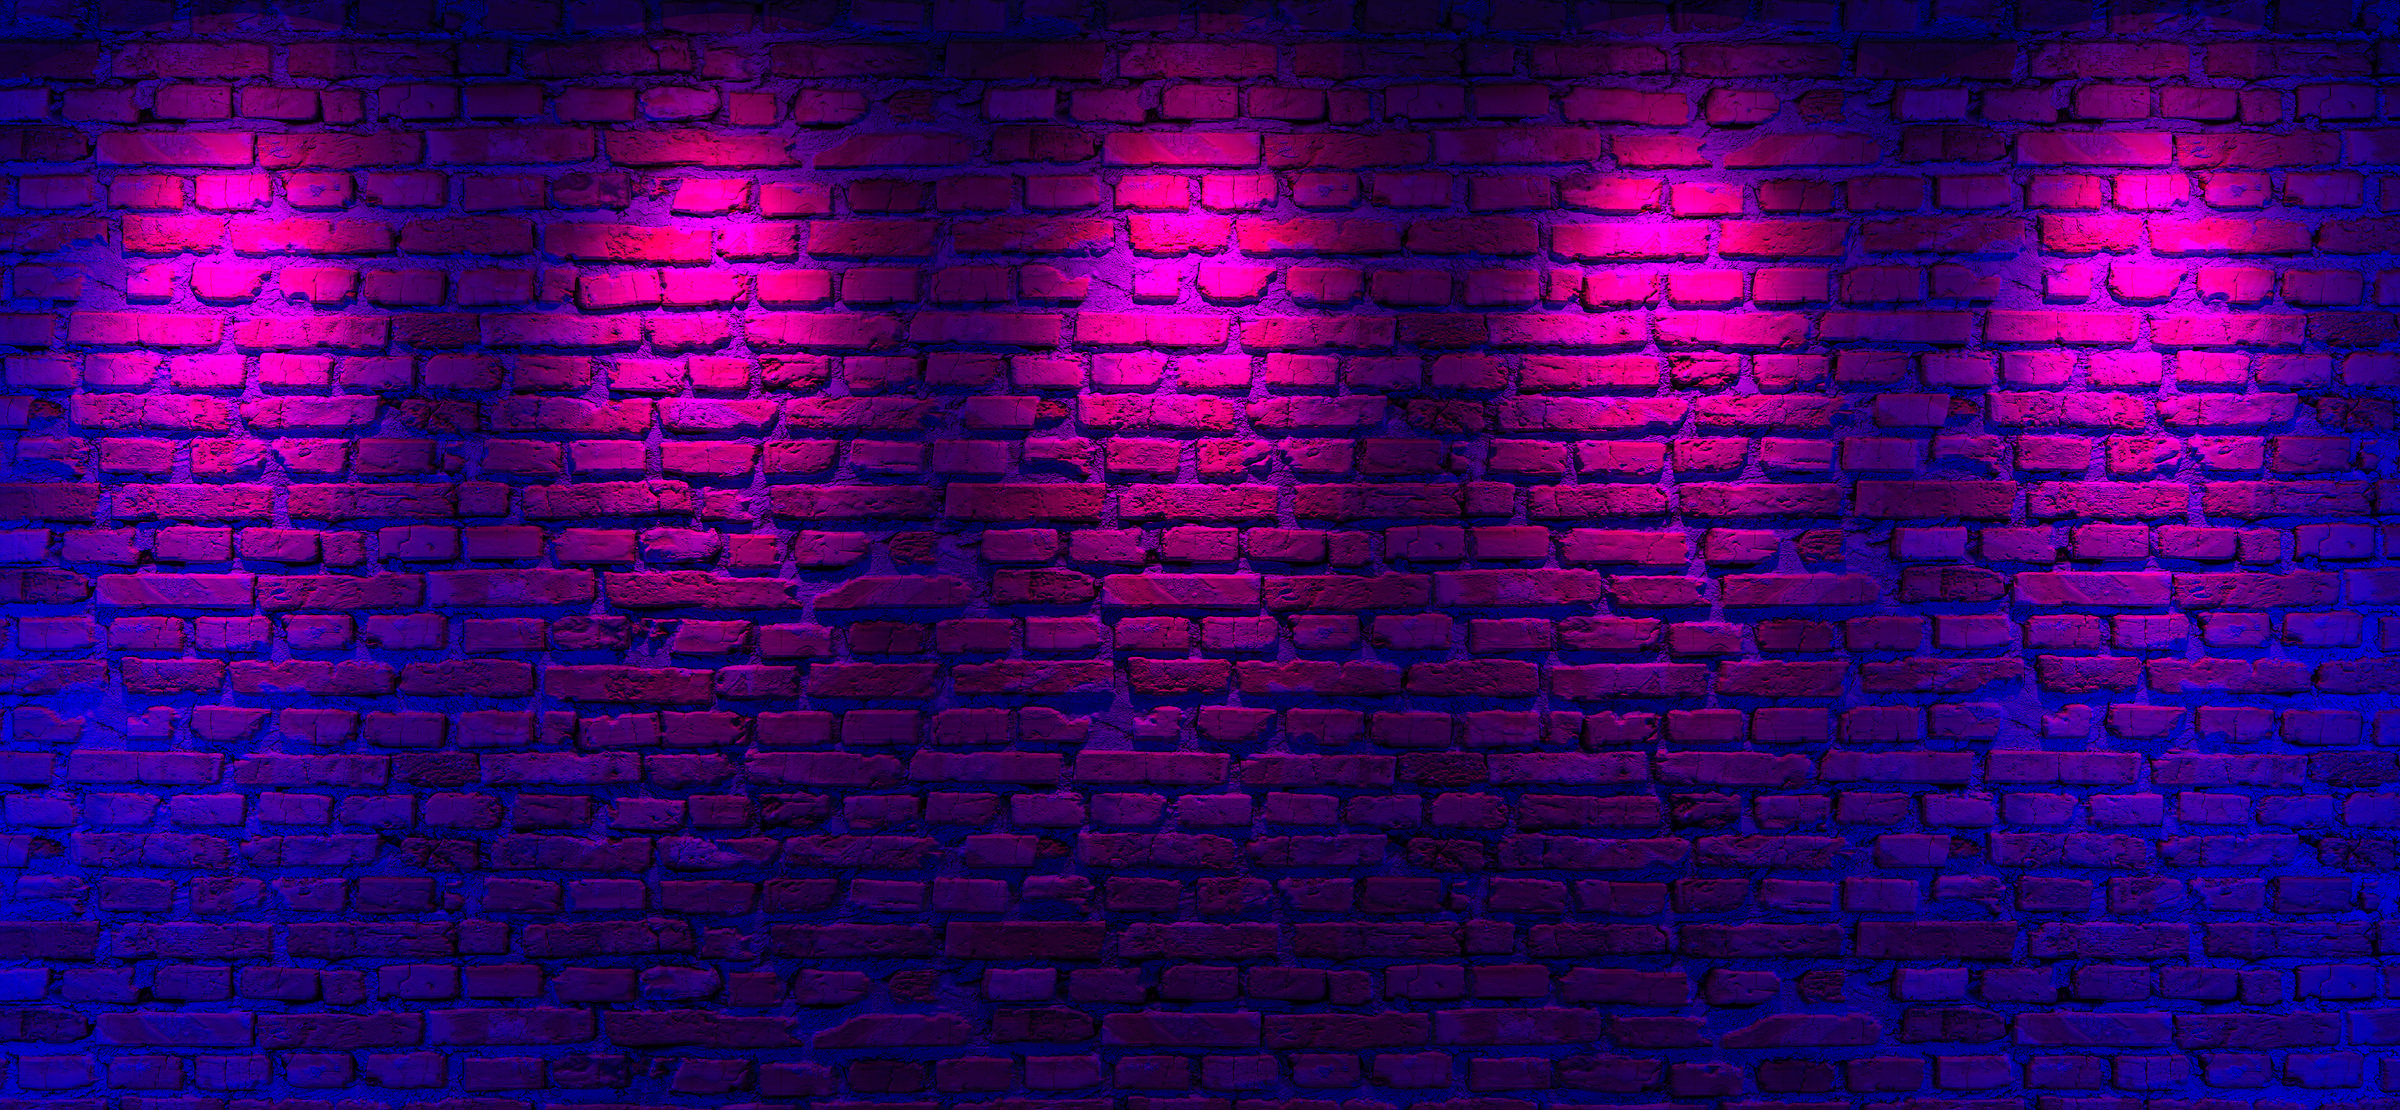 Brick Walls with Neon Light Background